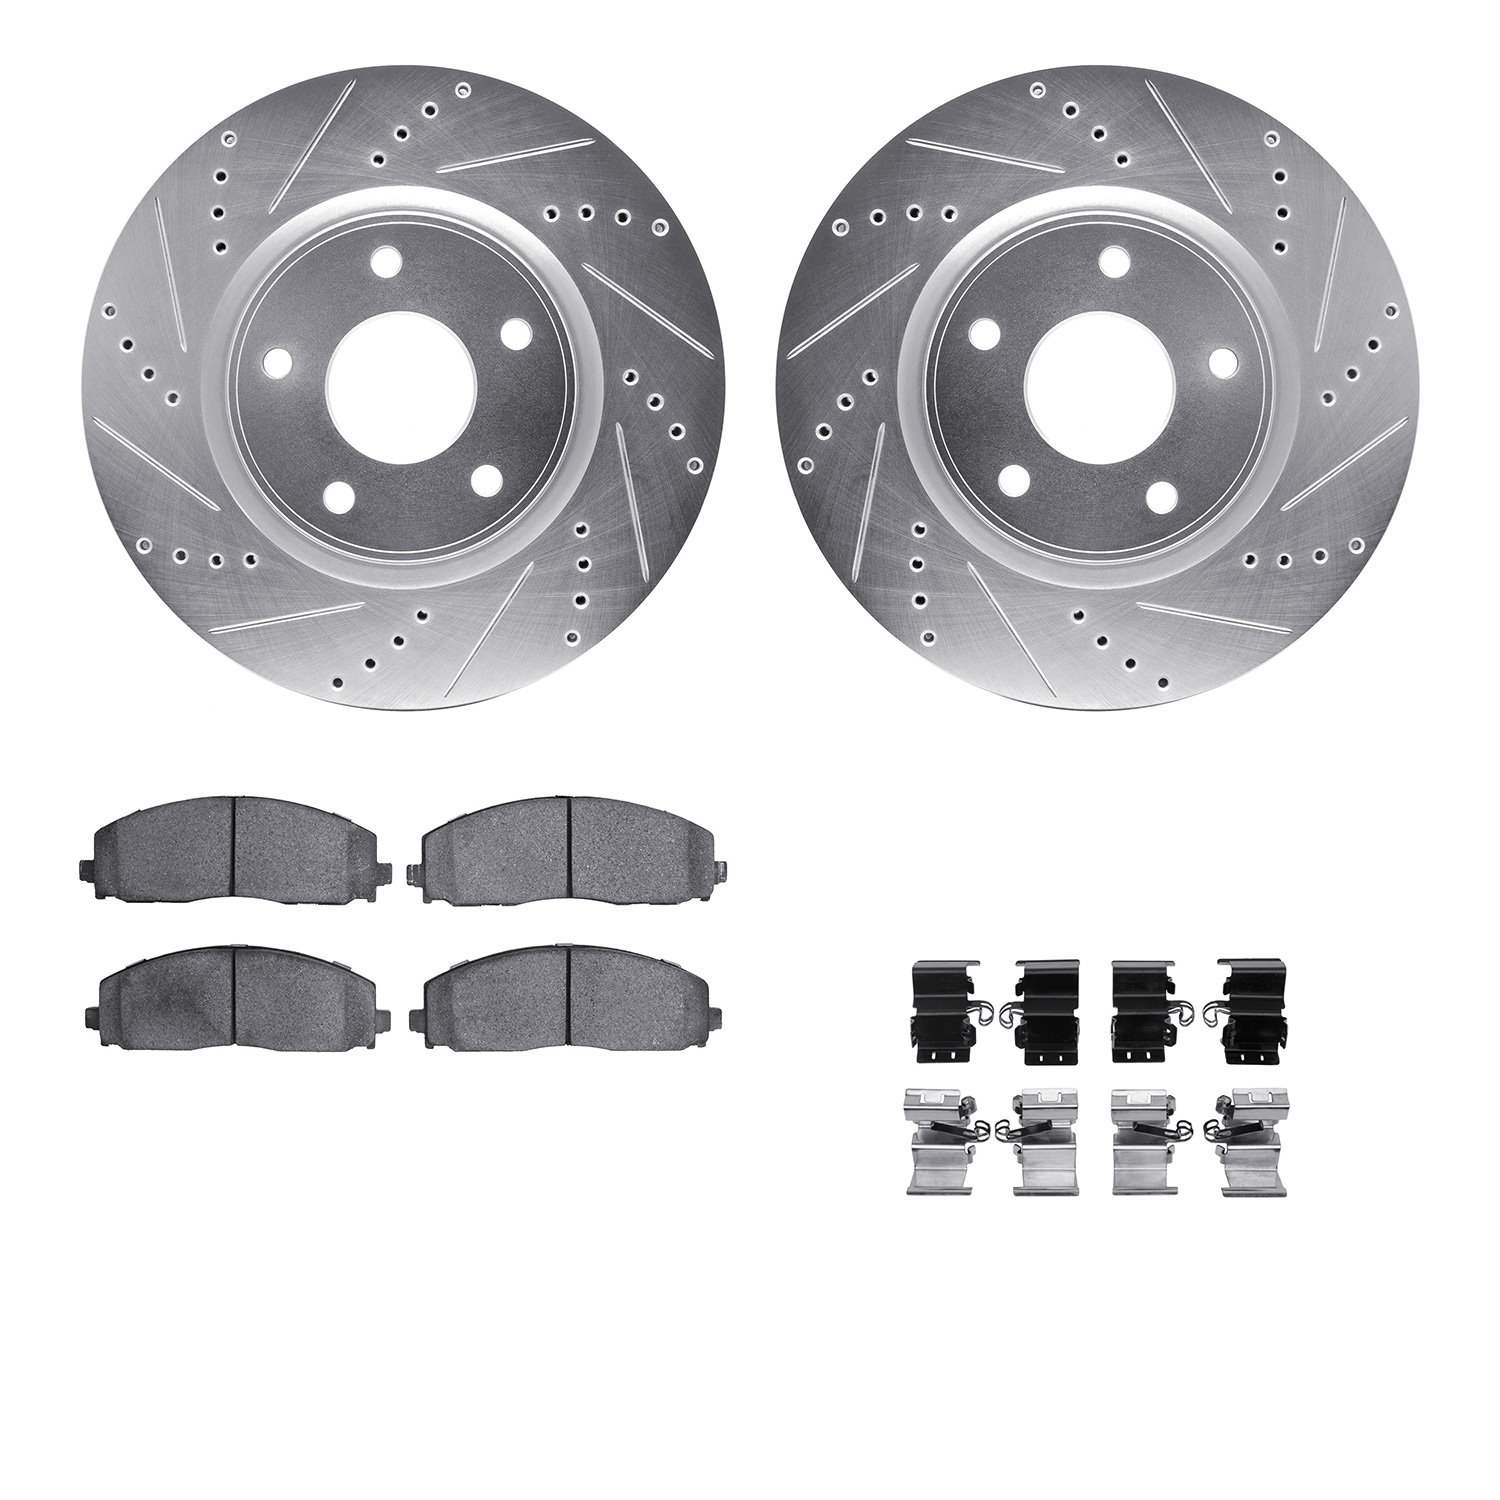 7412-40022 Drilled/Slotted Brake Rotors with Ultimate-Duty Brake Pads Kit & Hardware [Silver], Fits Select Multiple Makes/Models